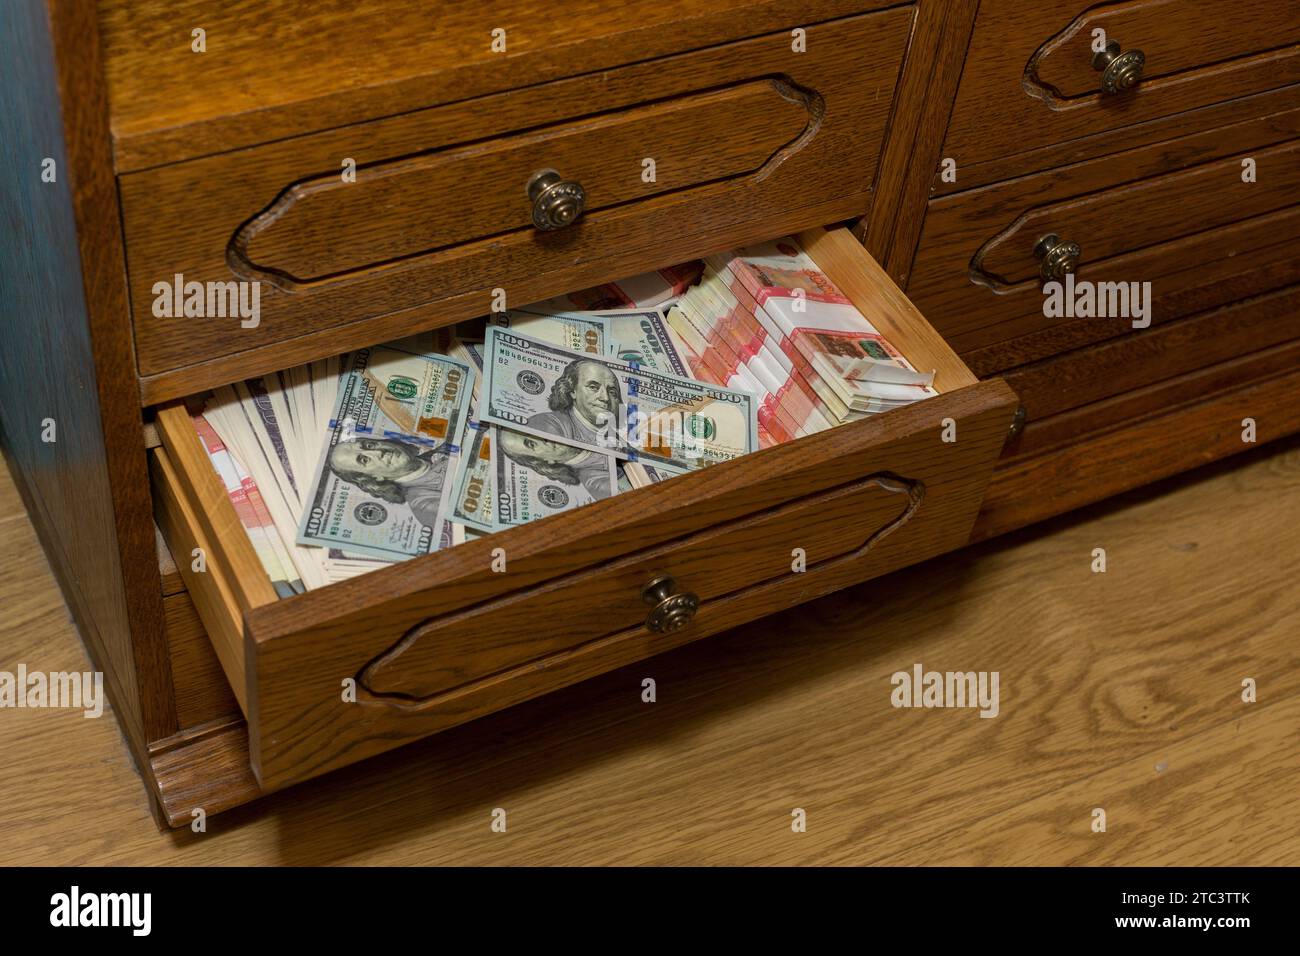 Savings in dollars and in Russian rubles of five thousand each, stored in an old closet. A large amount of money in cash. Stock Photo